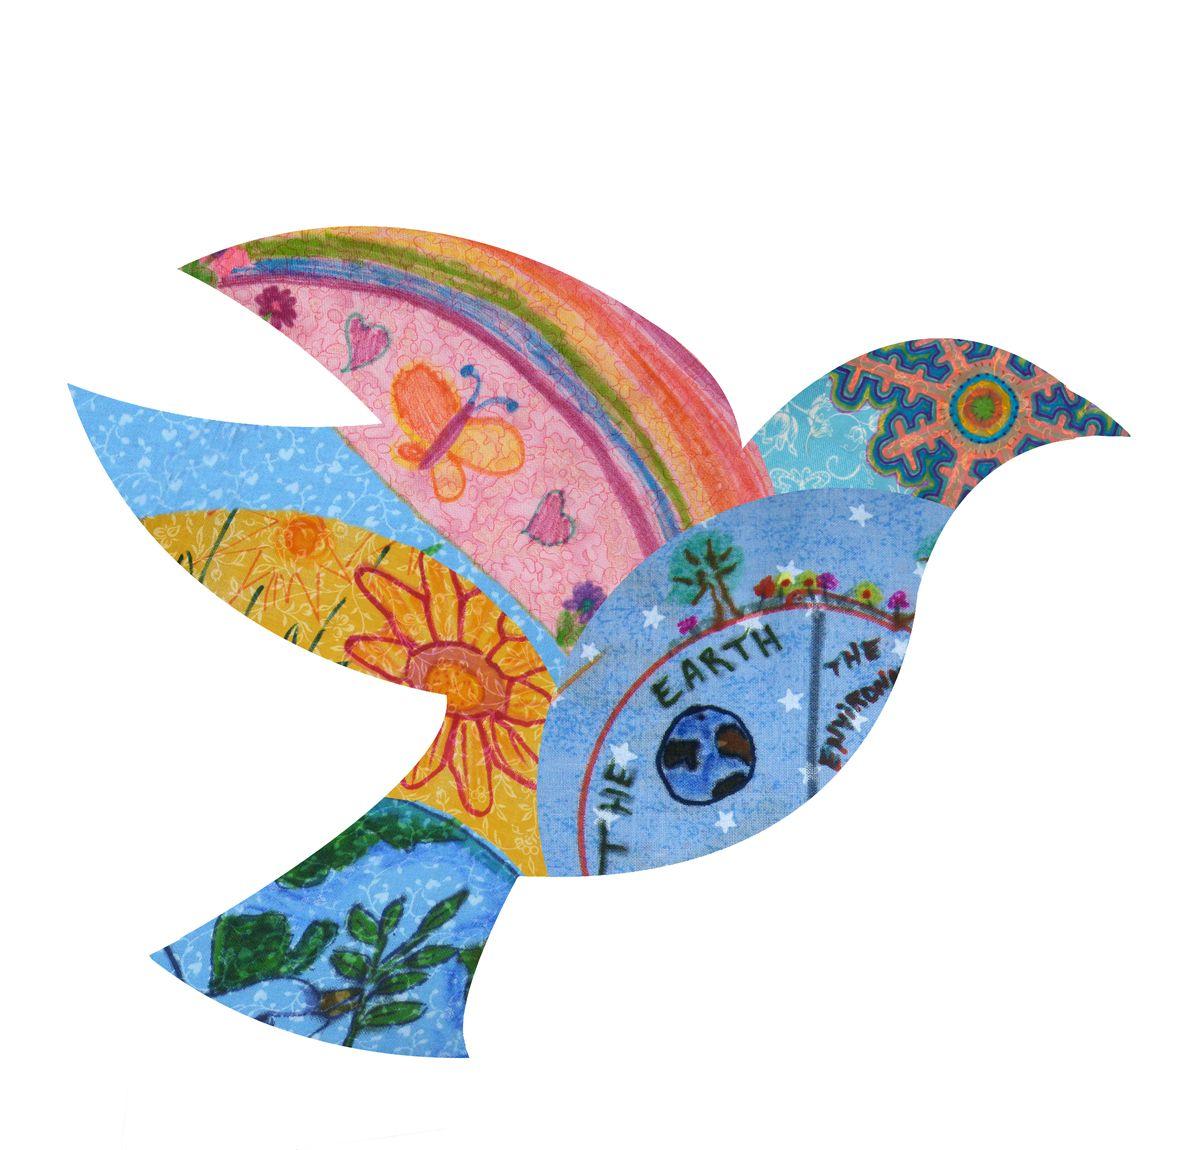 International Peace Day Image, Picture, Photo, Wallpaper, Quotes